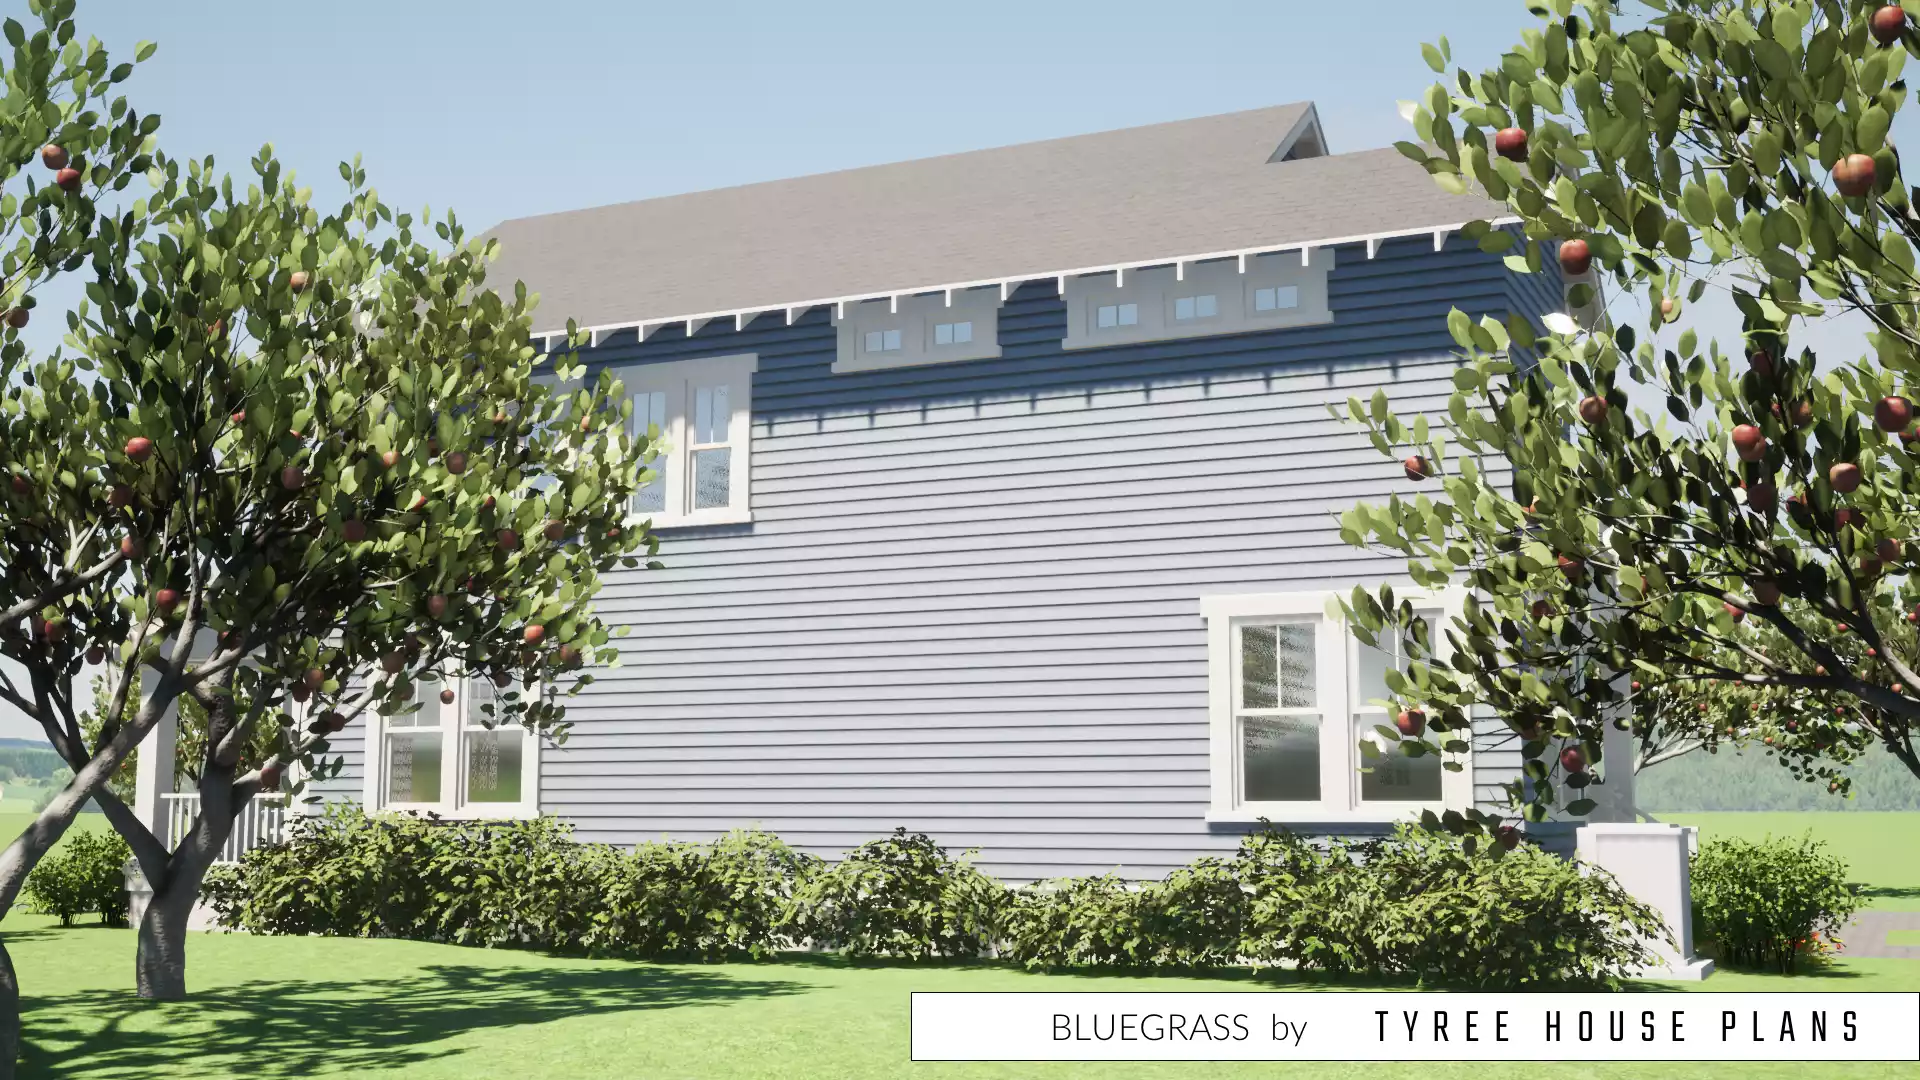 Right side. Bluegrass by Tyree House Plans.